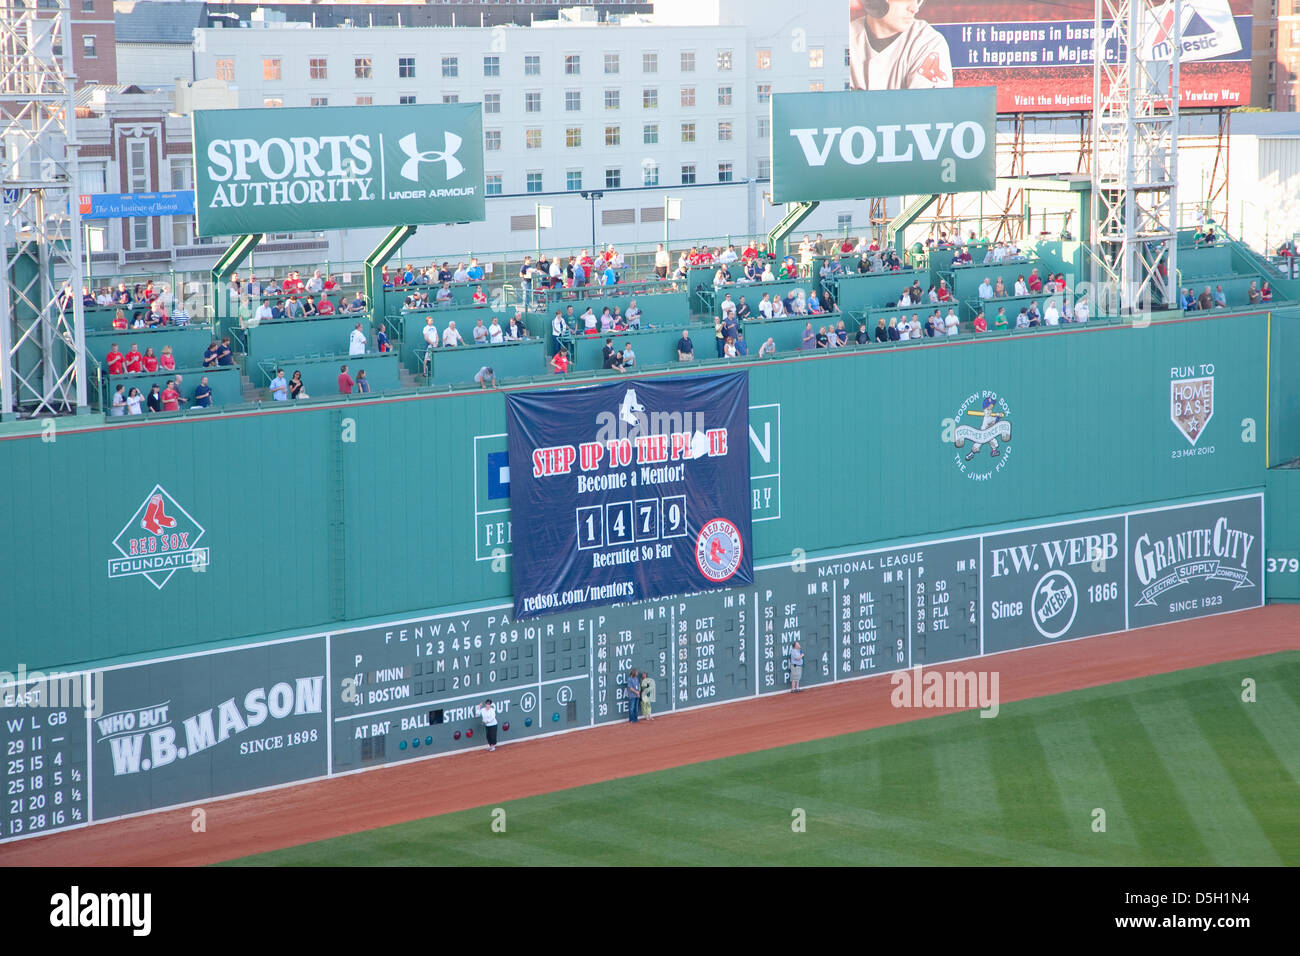 green monster red sox